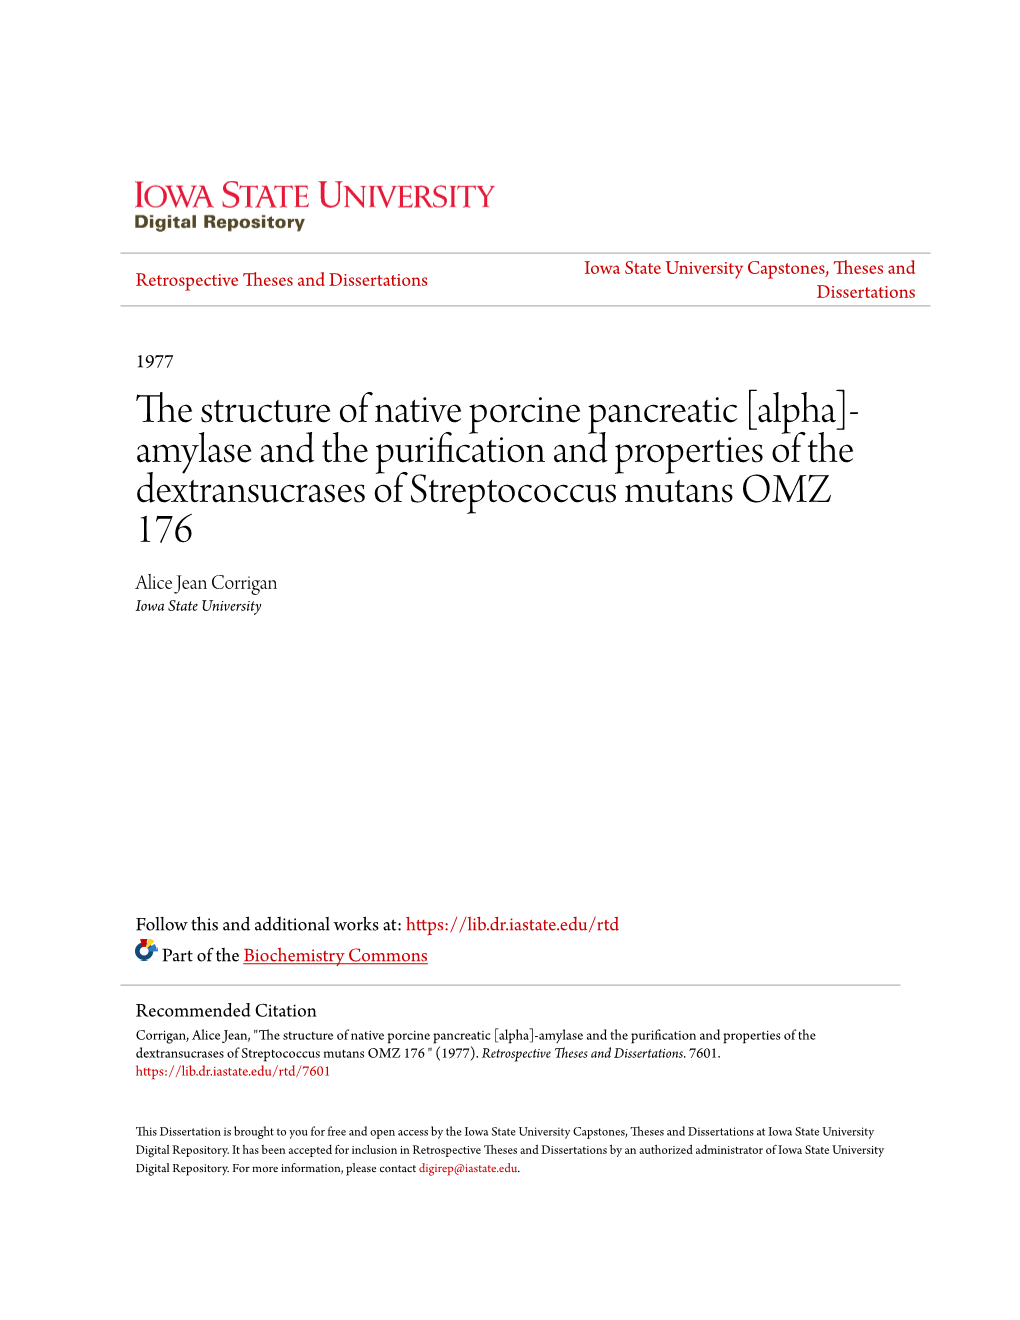 The Structure of Native Porcine Pancreatic [Alpha]-Amylase and The